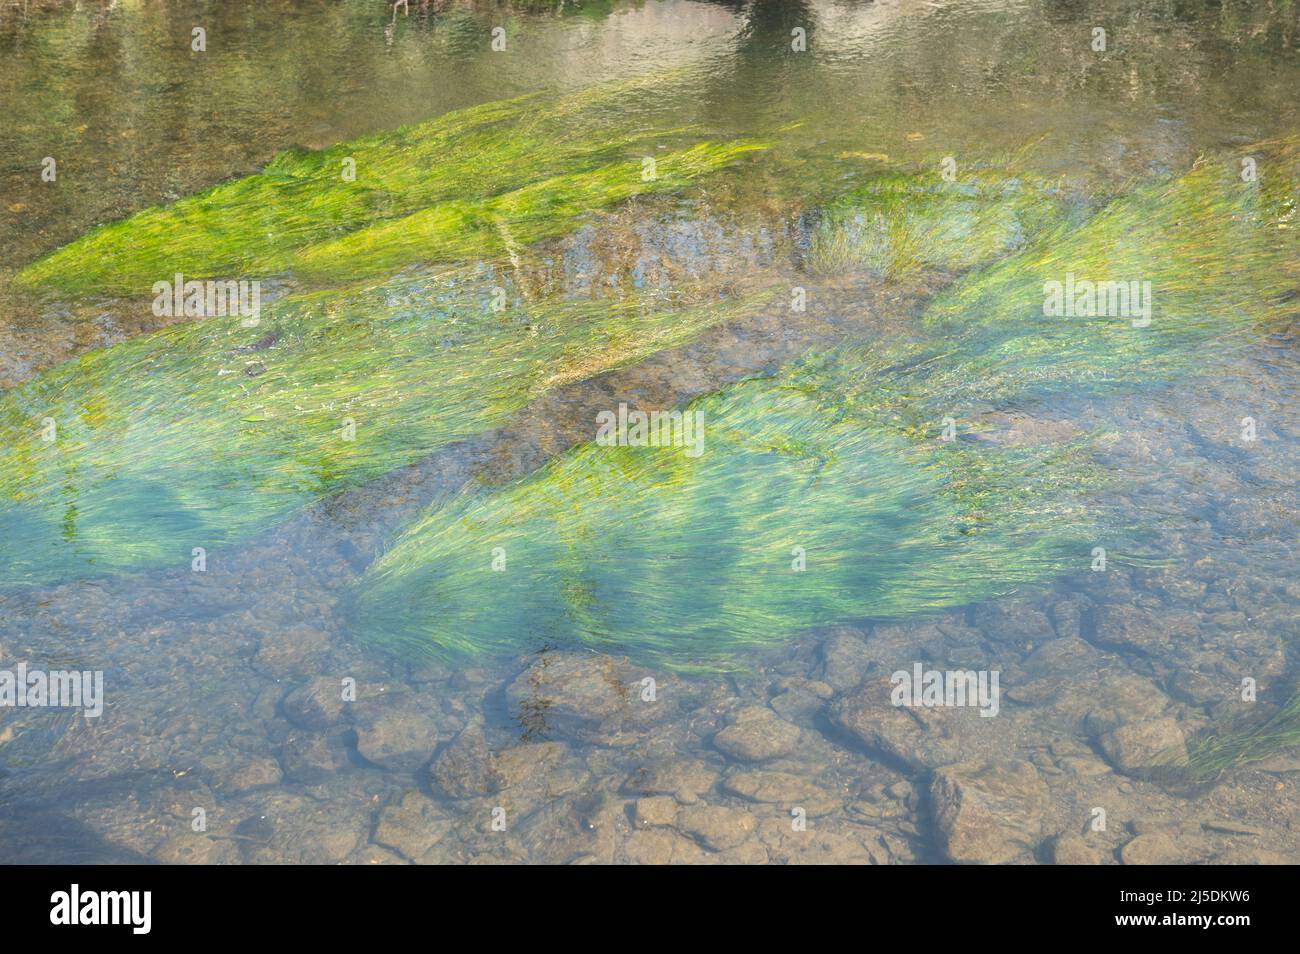 Ranunculus aquatic weed growing underwater in River Cynin, St Clears, Carmarthenshire, Wales, UK Stock Photo